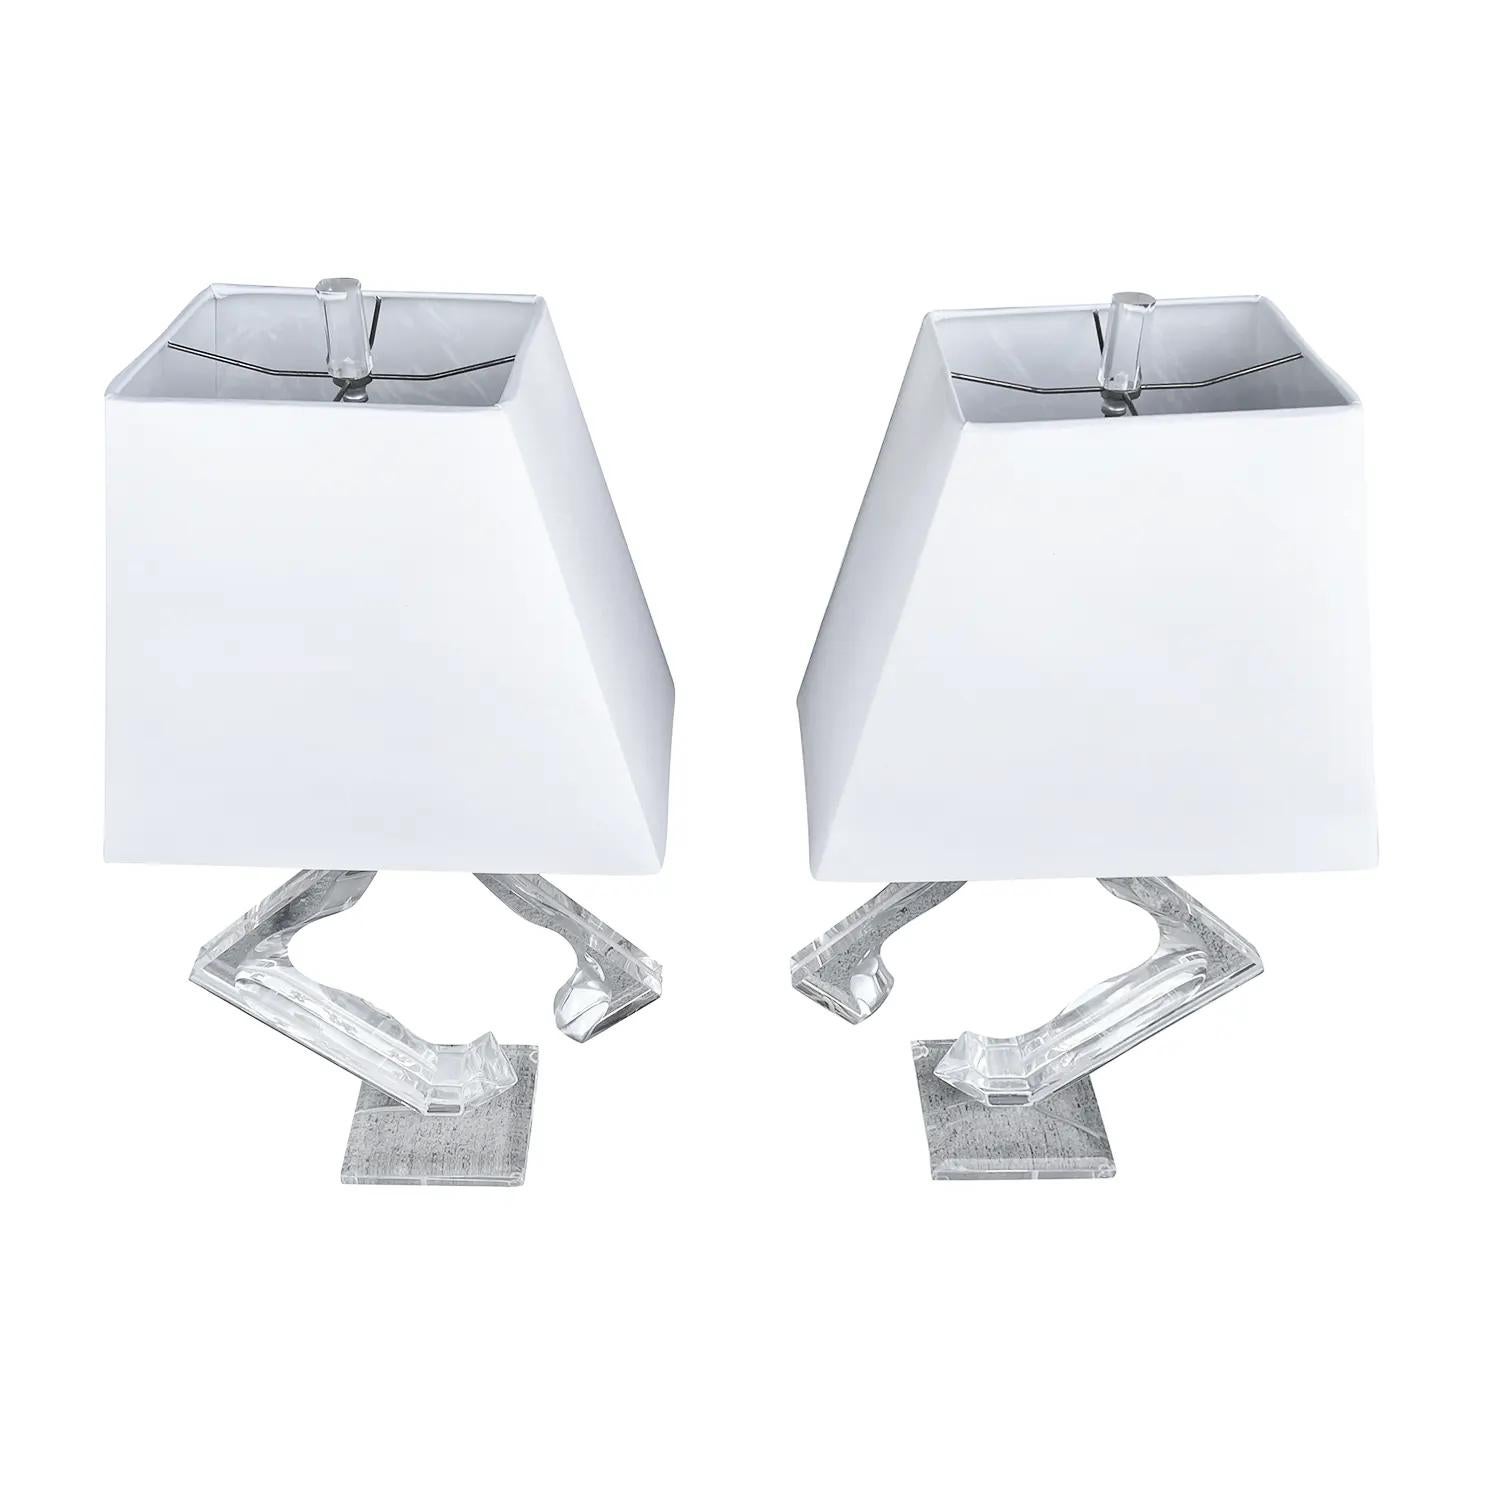 A vintage Mid-Century Modern American pair of sculptural table lamps made of hand crafted chromed metal and lucite glass, designed by Hivo Van Teal in good condition. The clear acrylic desk lights are composed with a new white shade, featuring a two